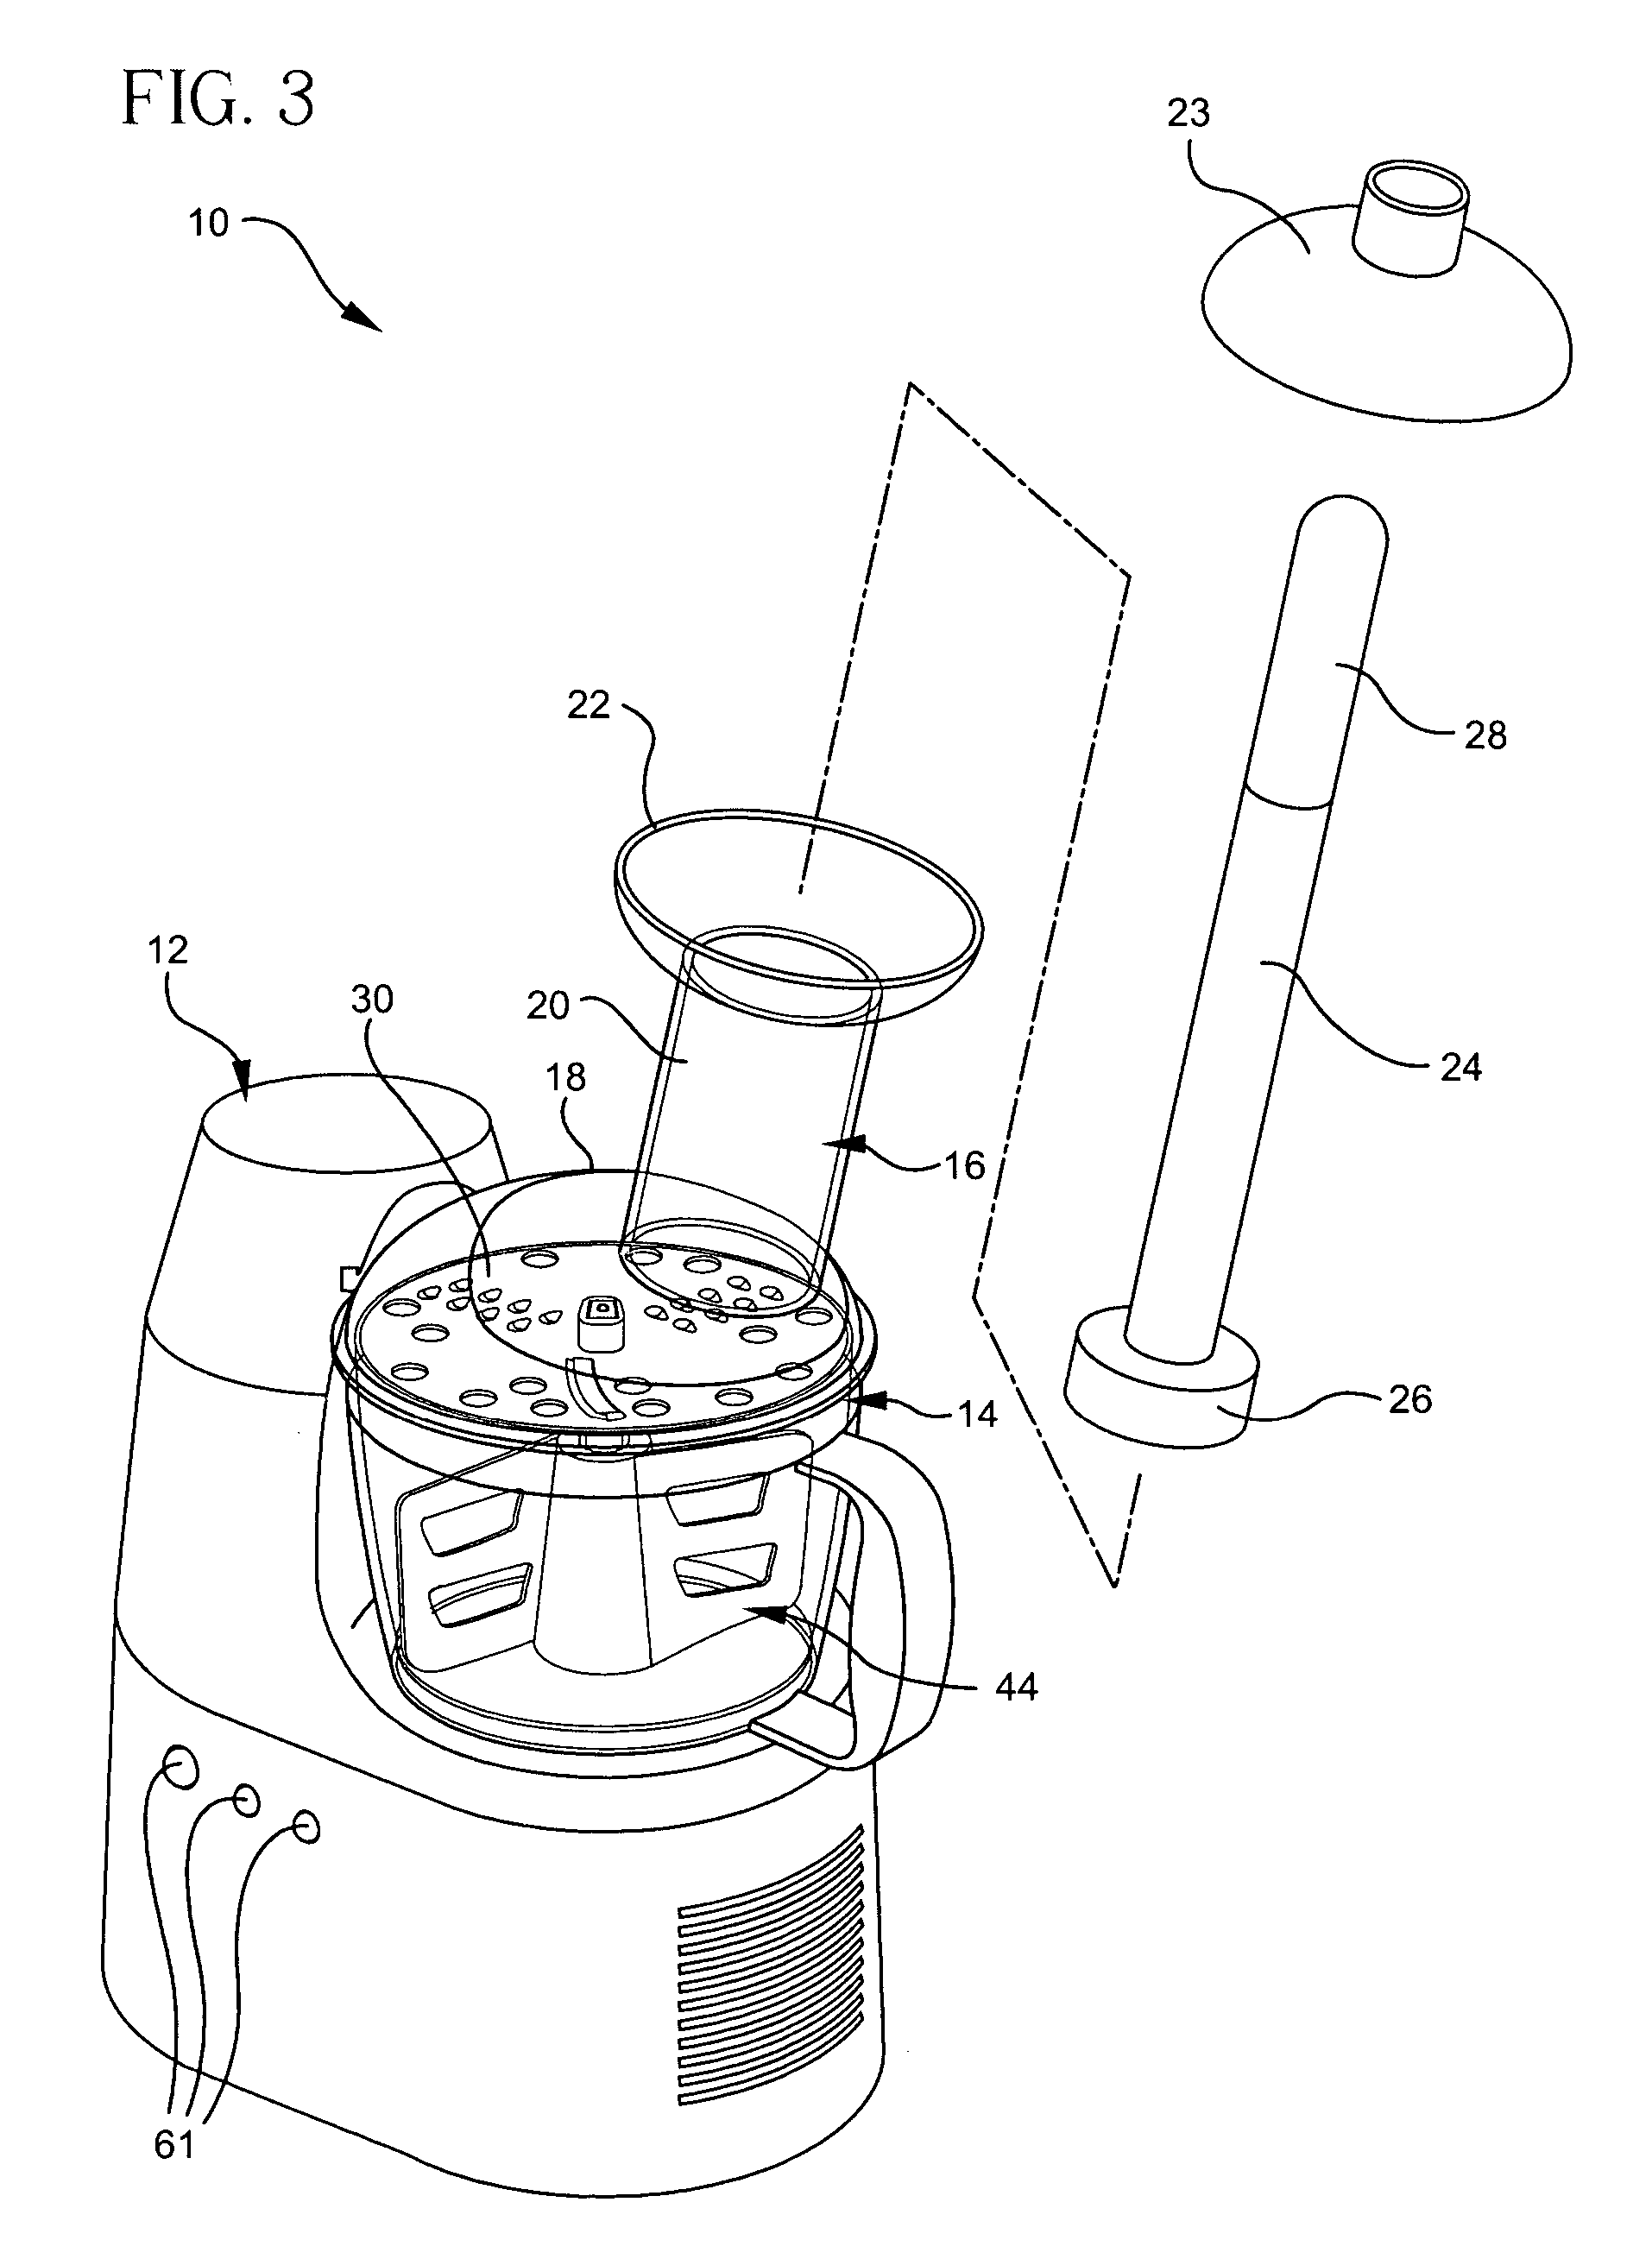 Method and apparatus for producing frozen desserts